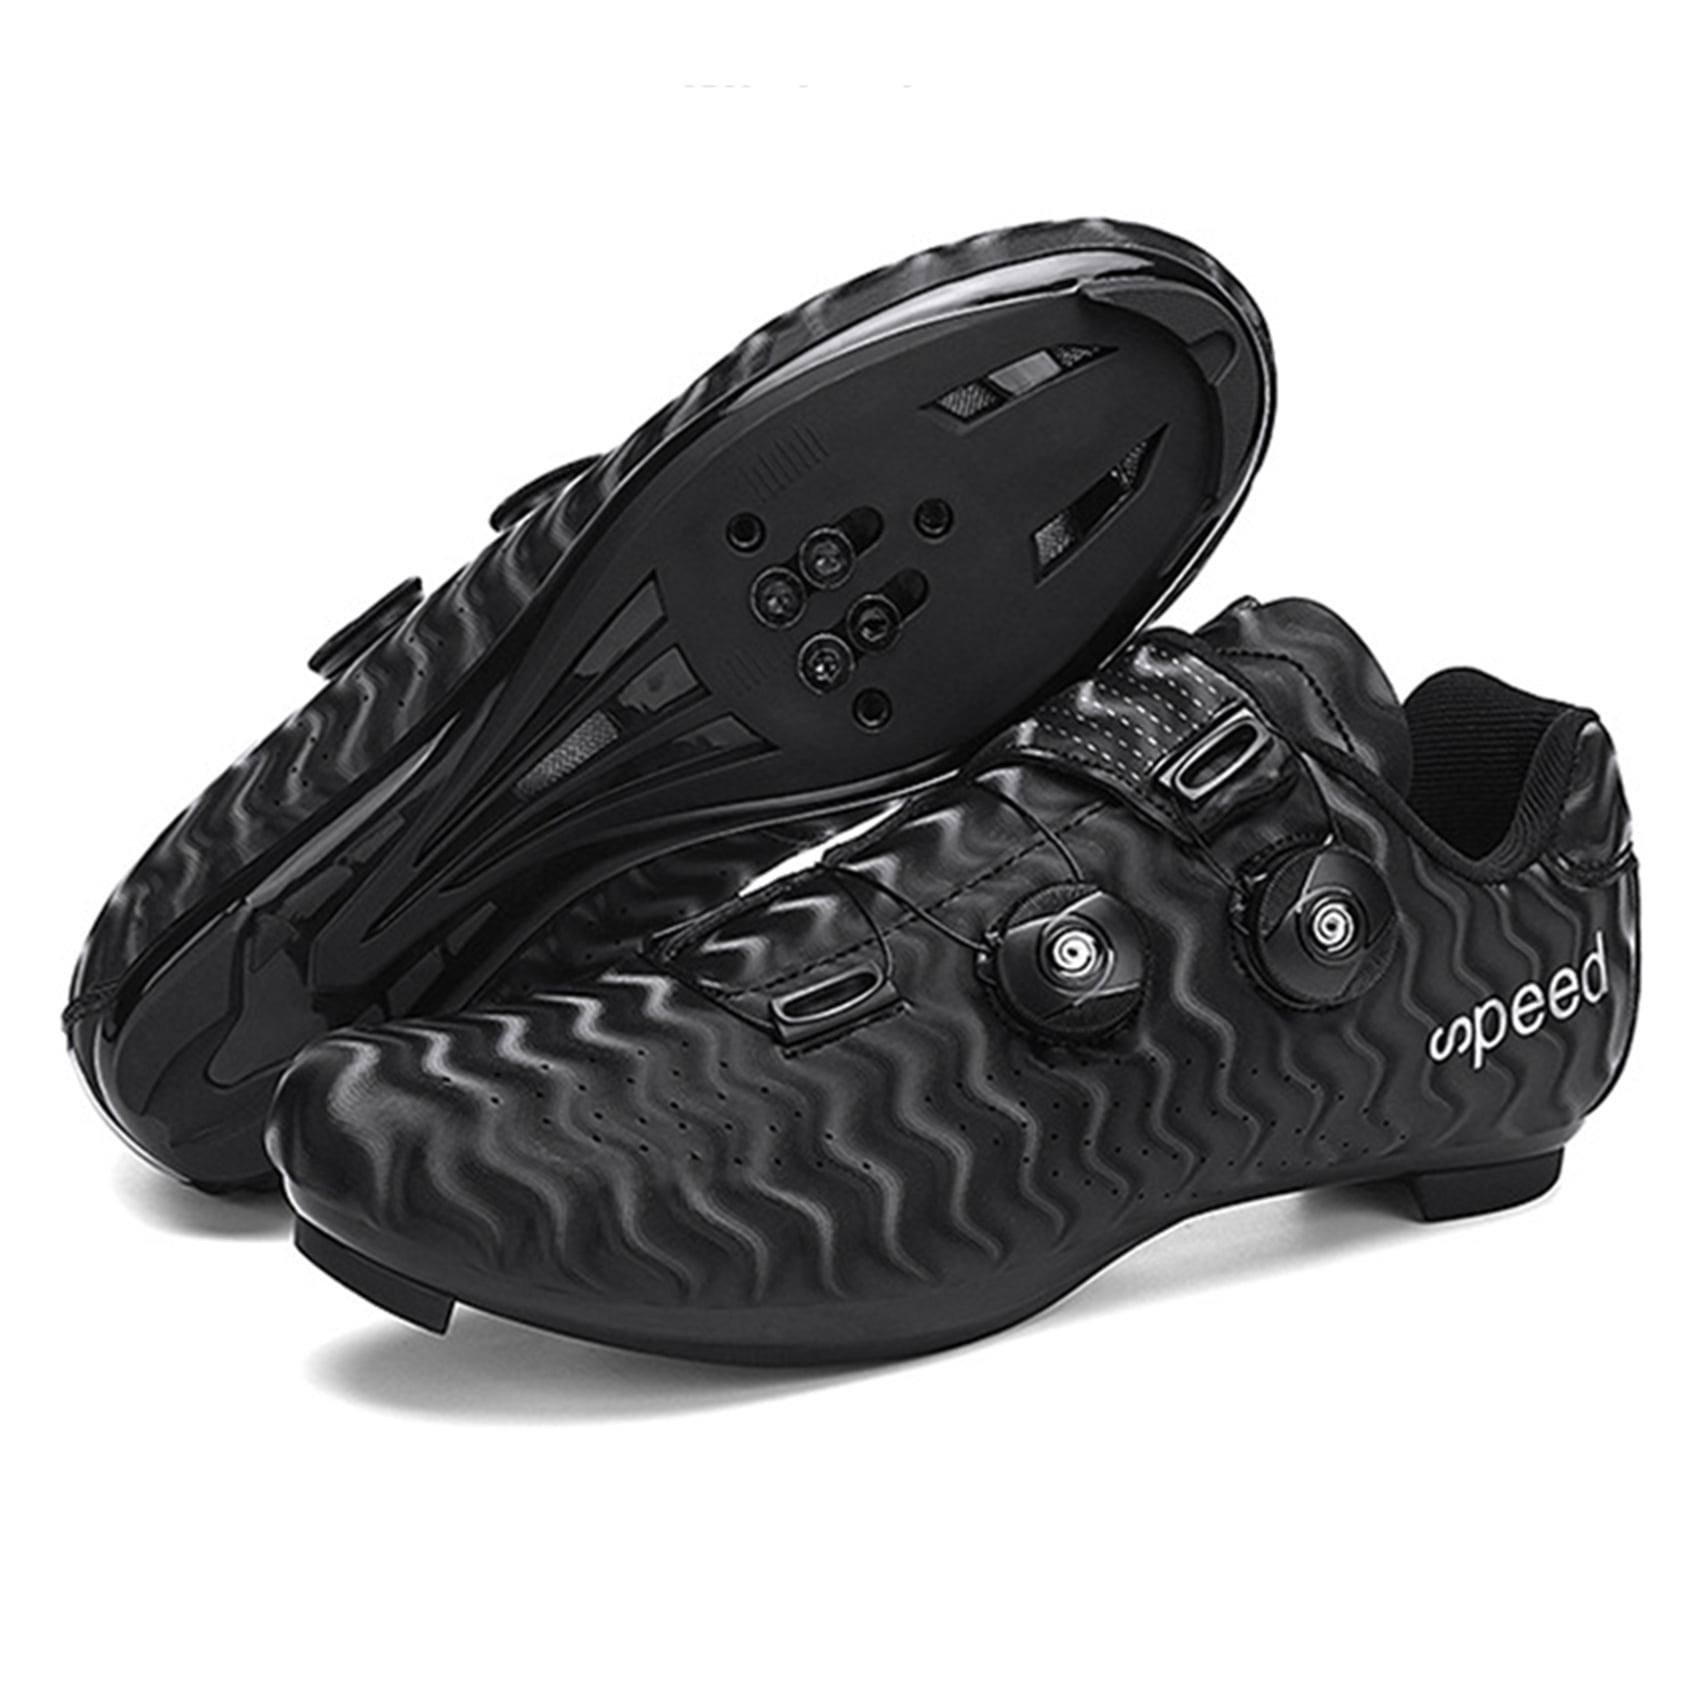 Details about   Santic Cycling Shoes Men SPD Mountain Bike Lock Shoes MTB Cycling Accessories Br 